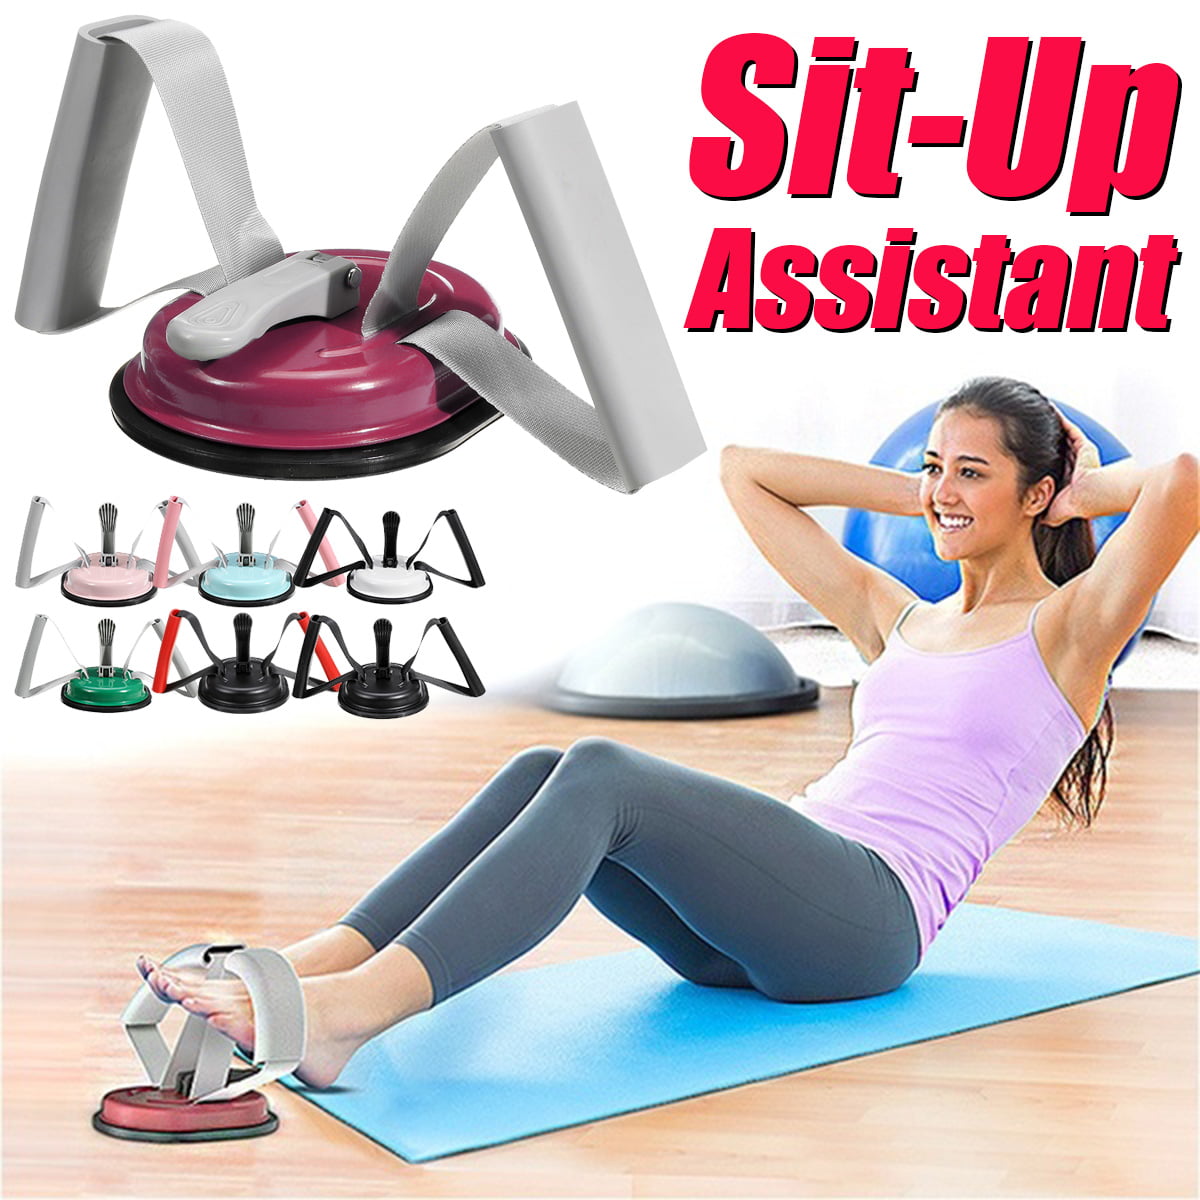 Sit Up Assistant Fitness Strength Training Workout Exercise Equipment Home Gym 